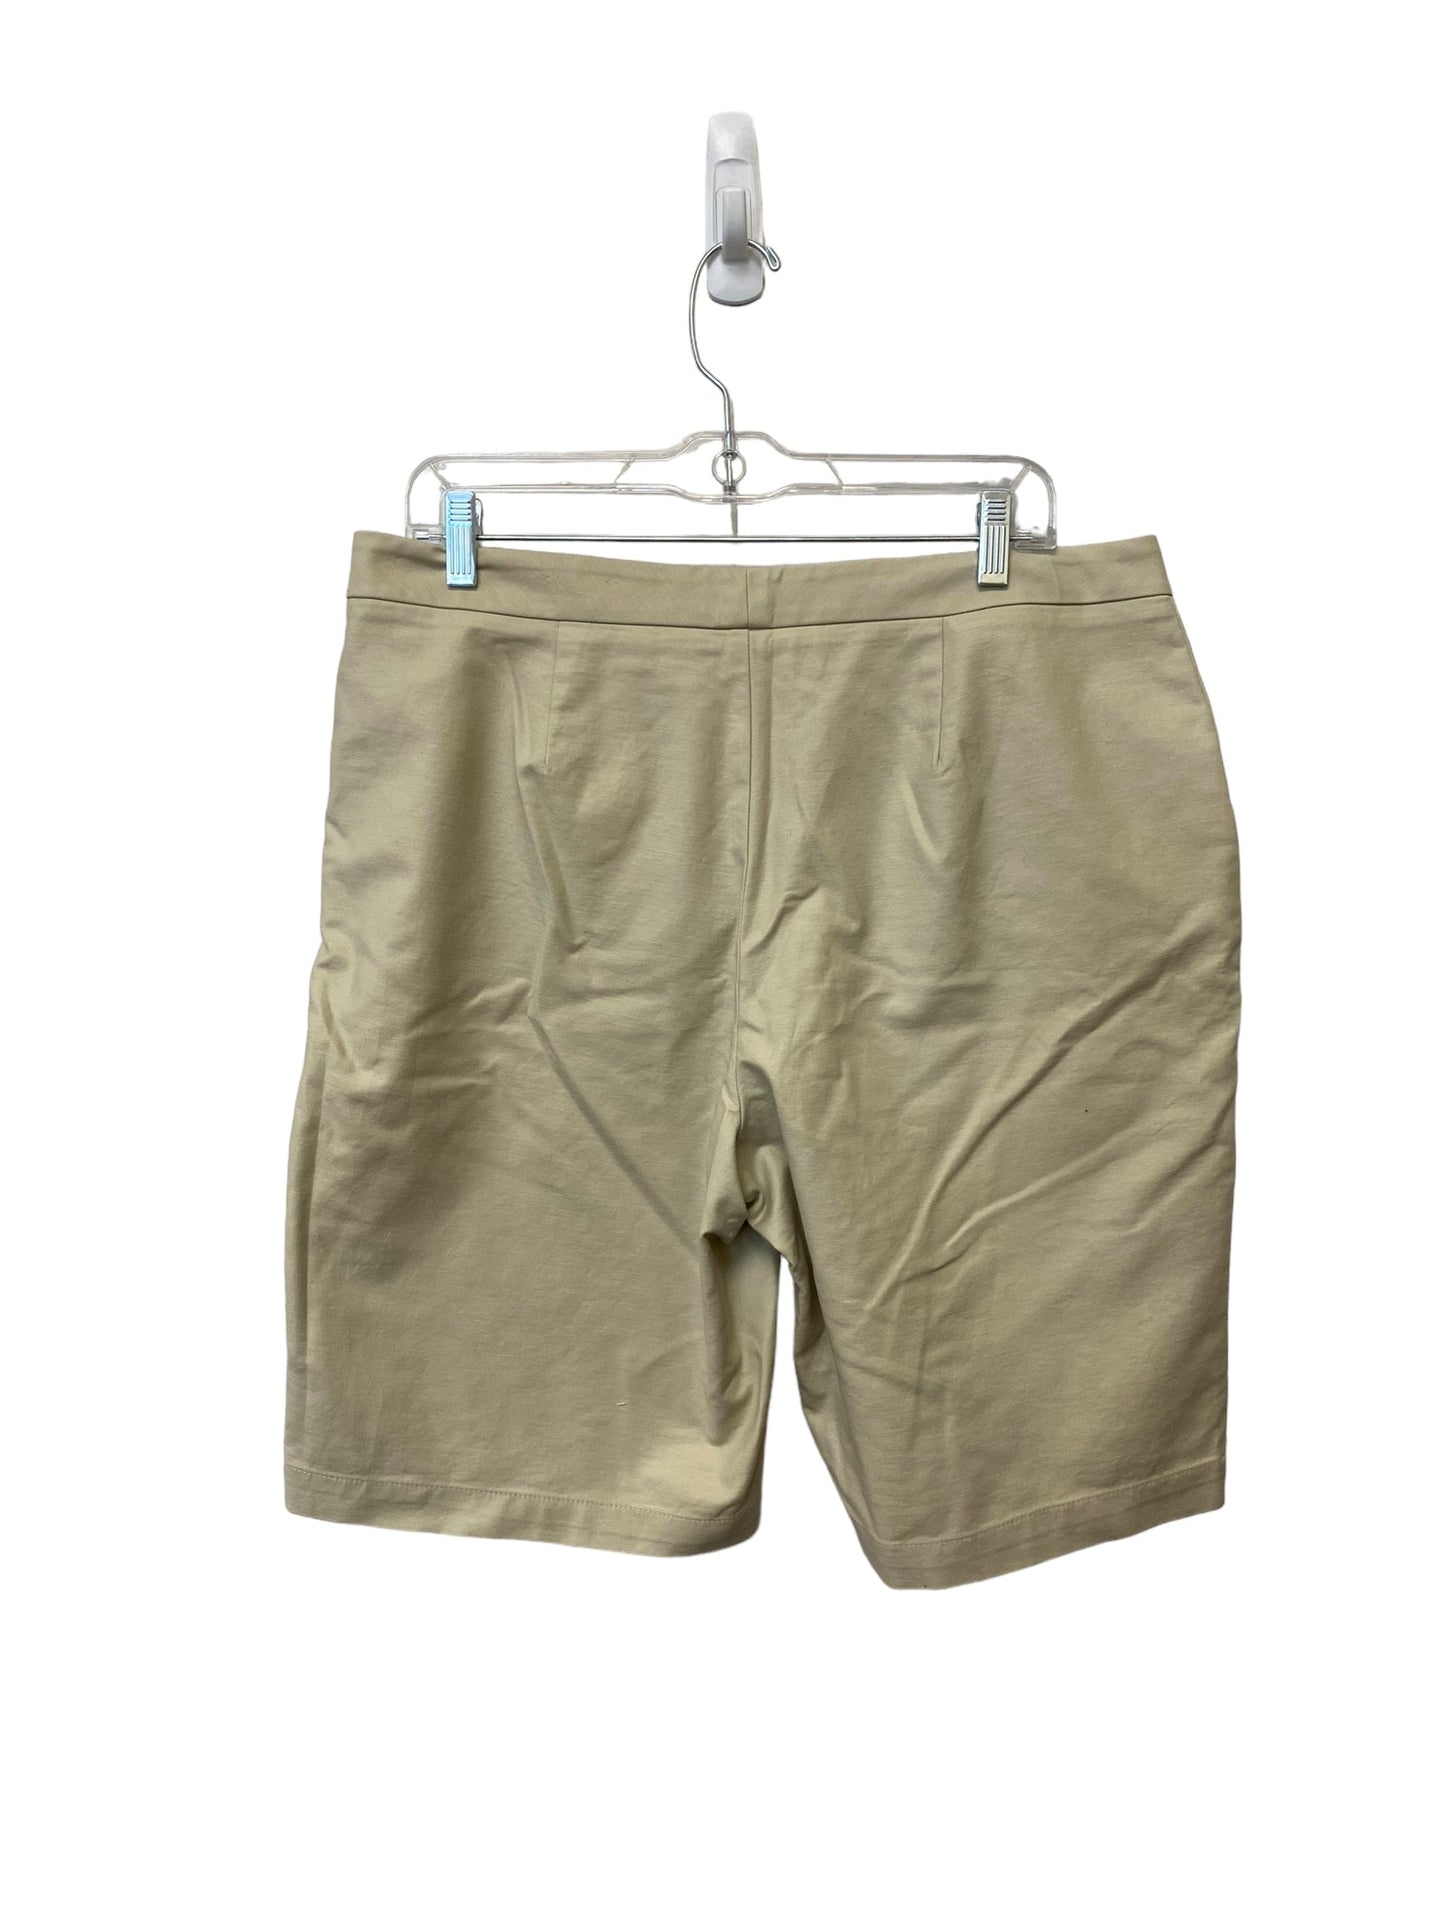 Beige Shorts Coldwater Creek, Size 14